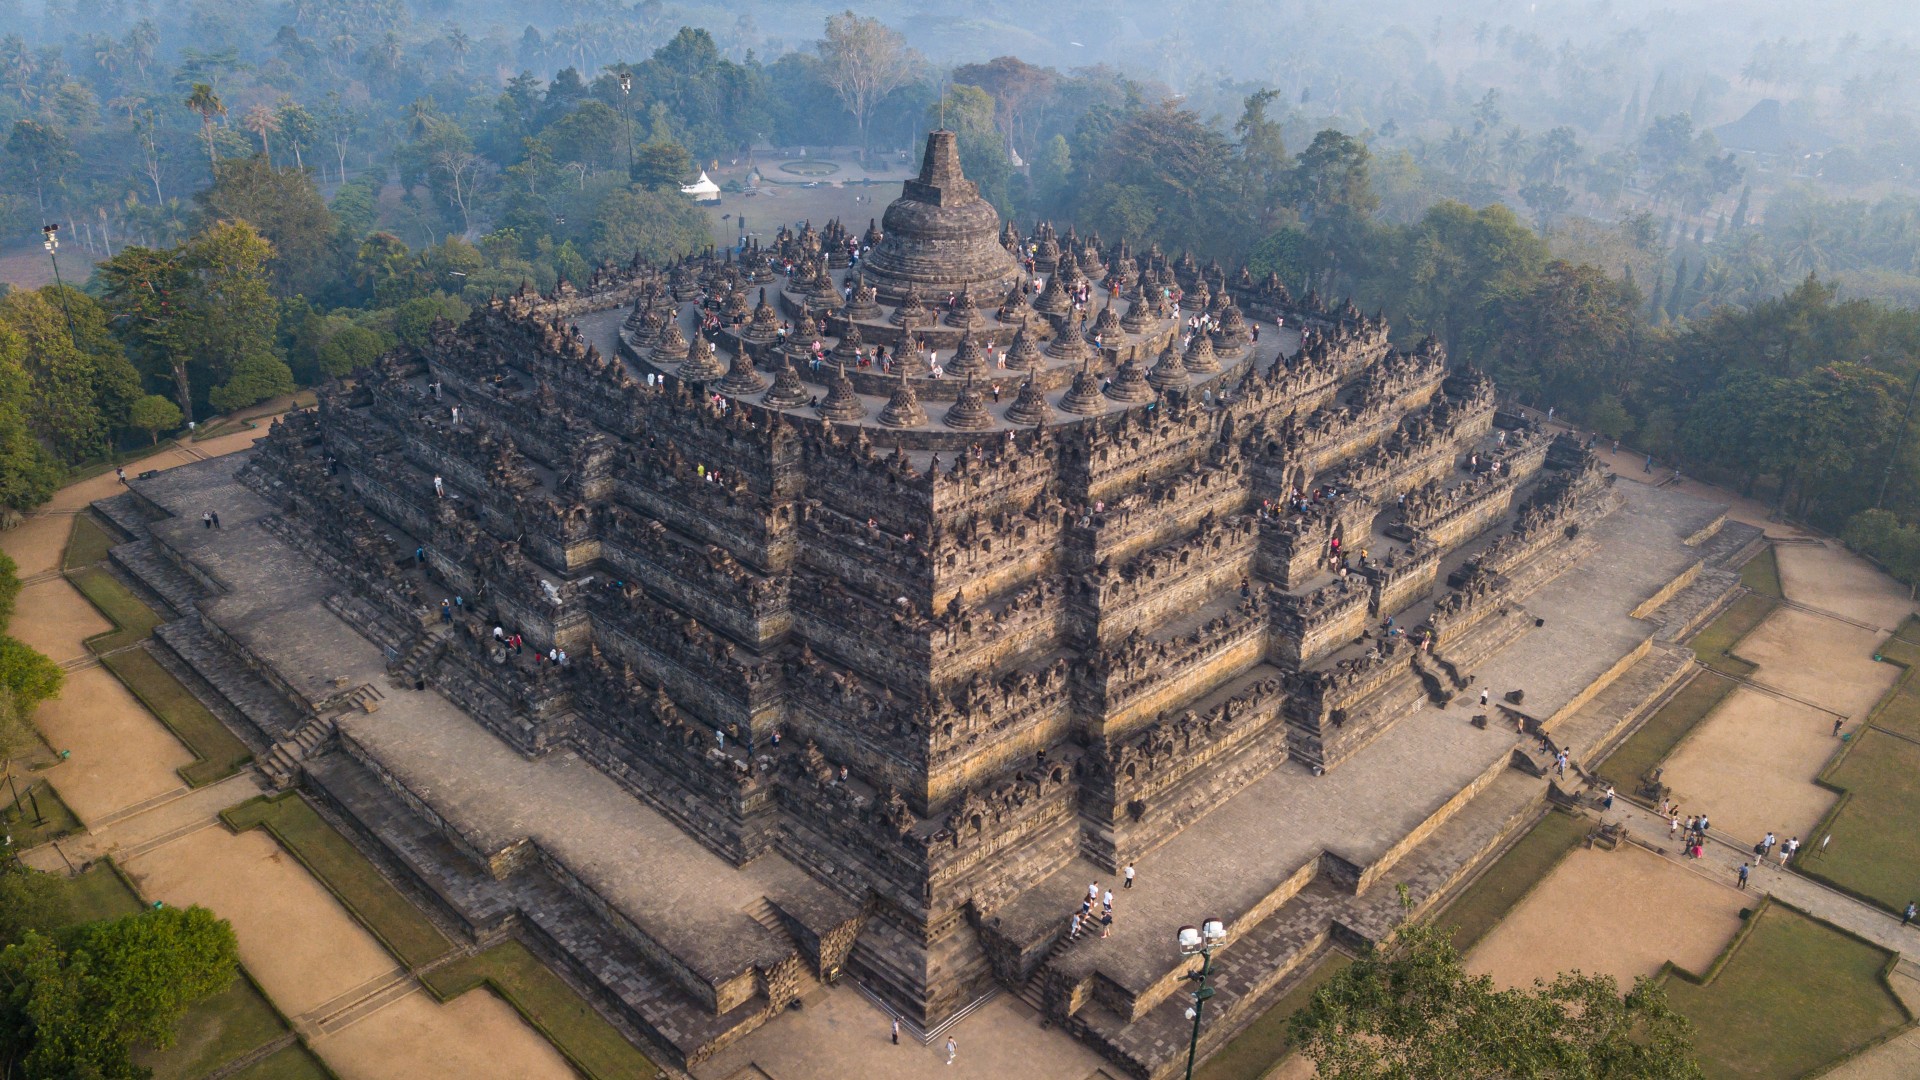 An aerial view of the world's biggest Buddhist temple's, Borobudur temple on the island of Java in Indonesia.